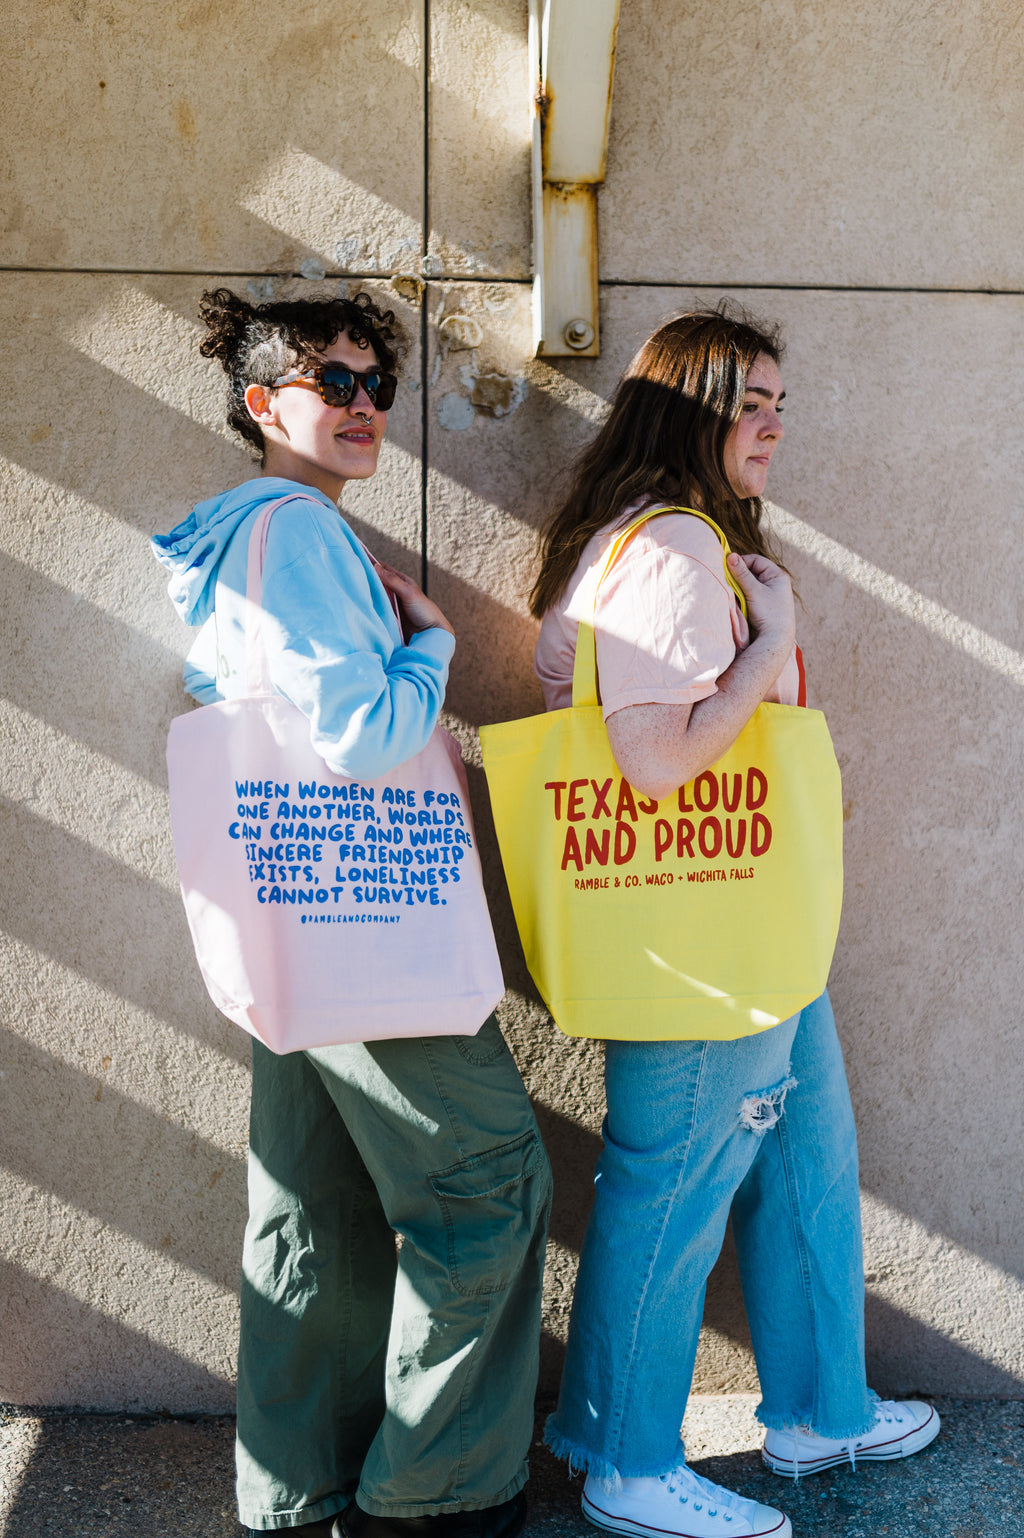 texas loud and proud | yellow tote